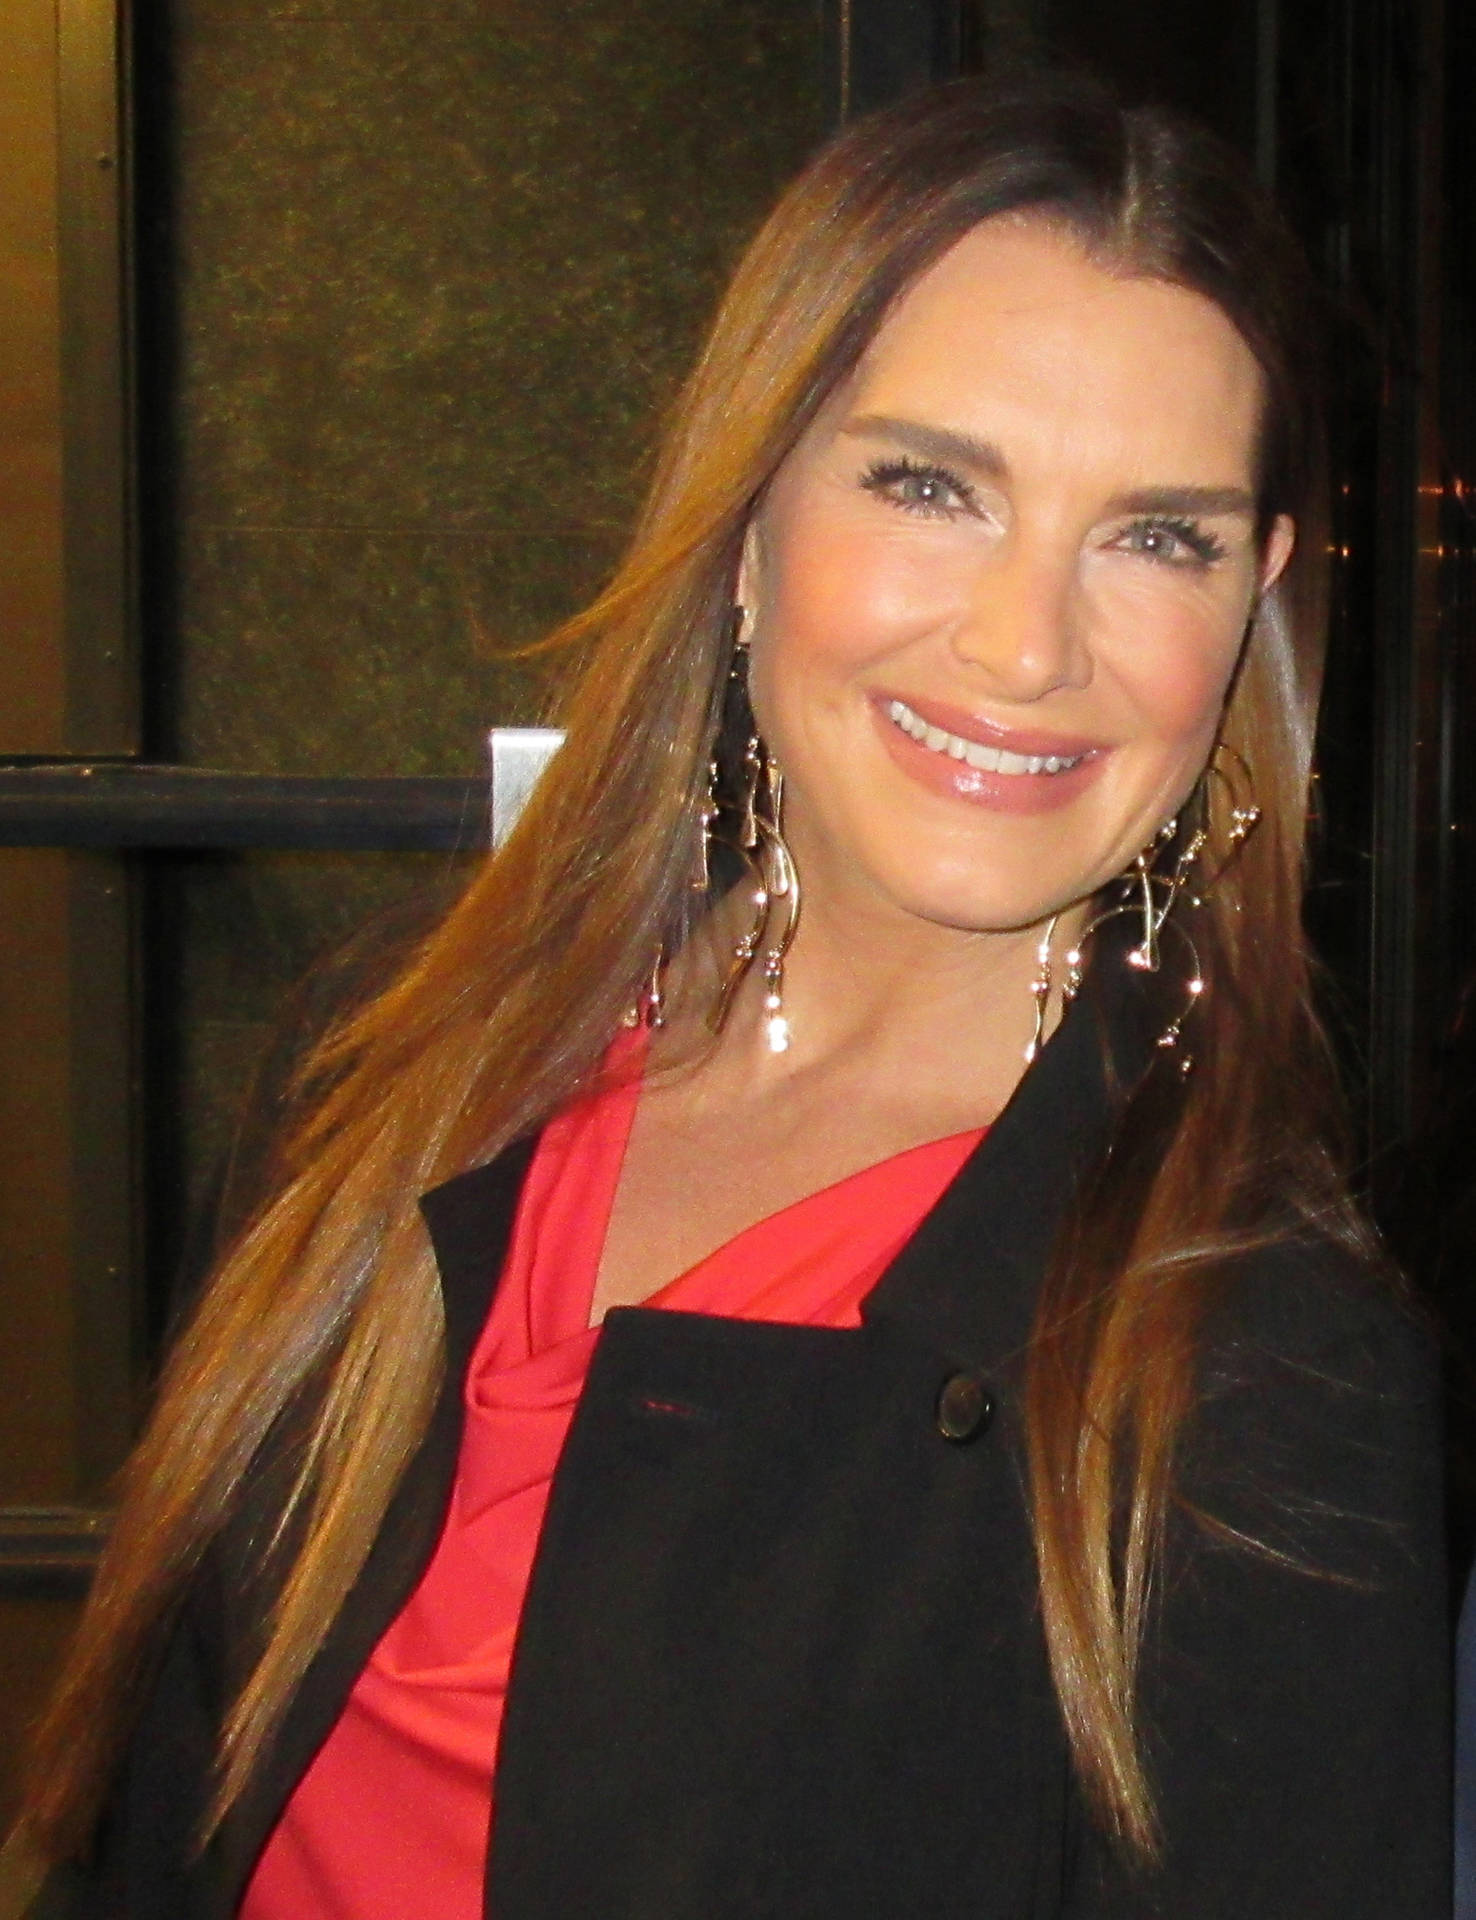 The Ever-radiant Brooke Shields With Her Charming Smile. Background